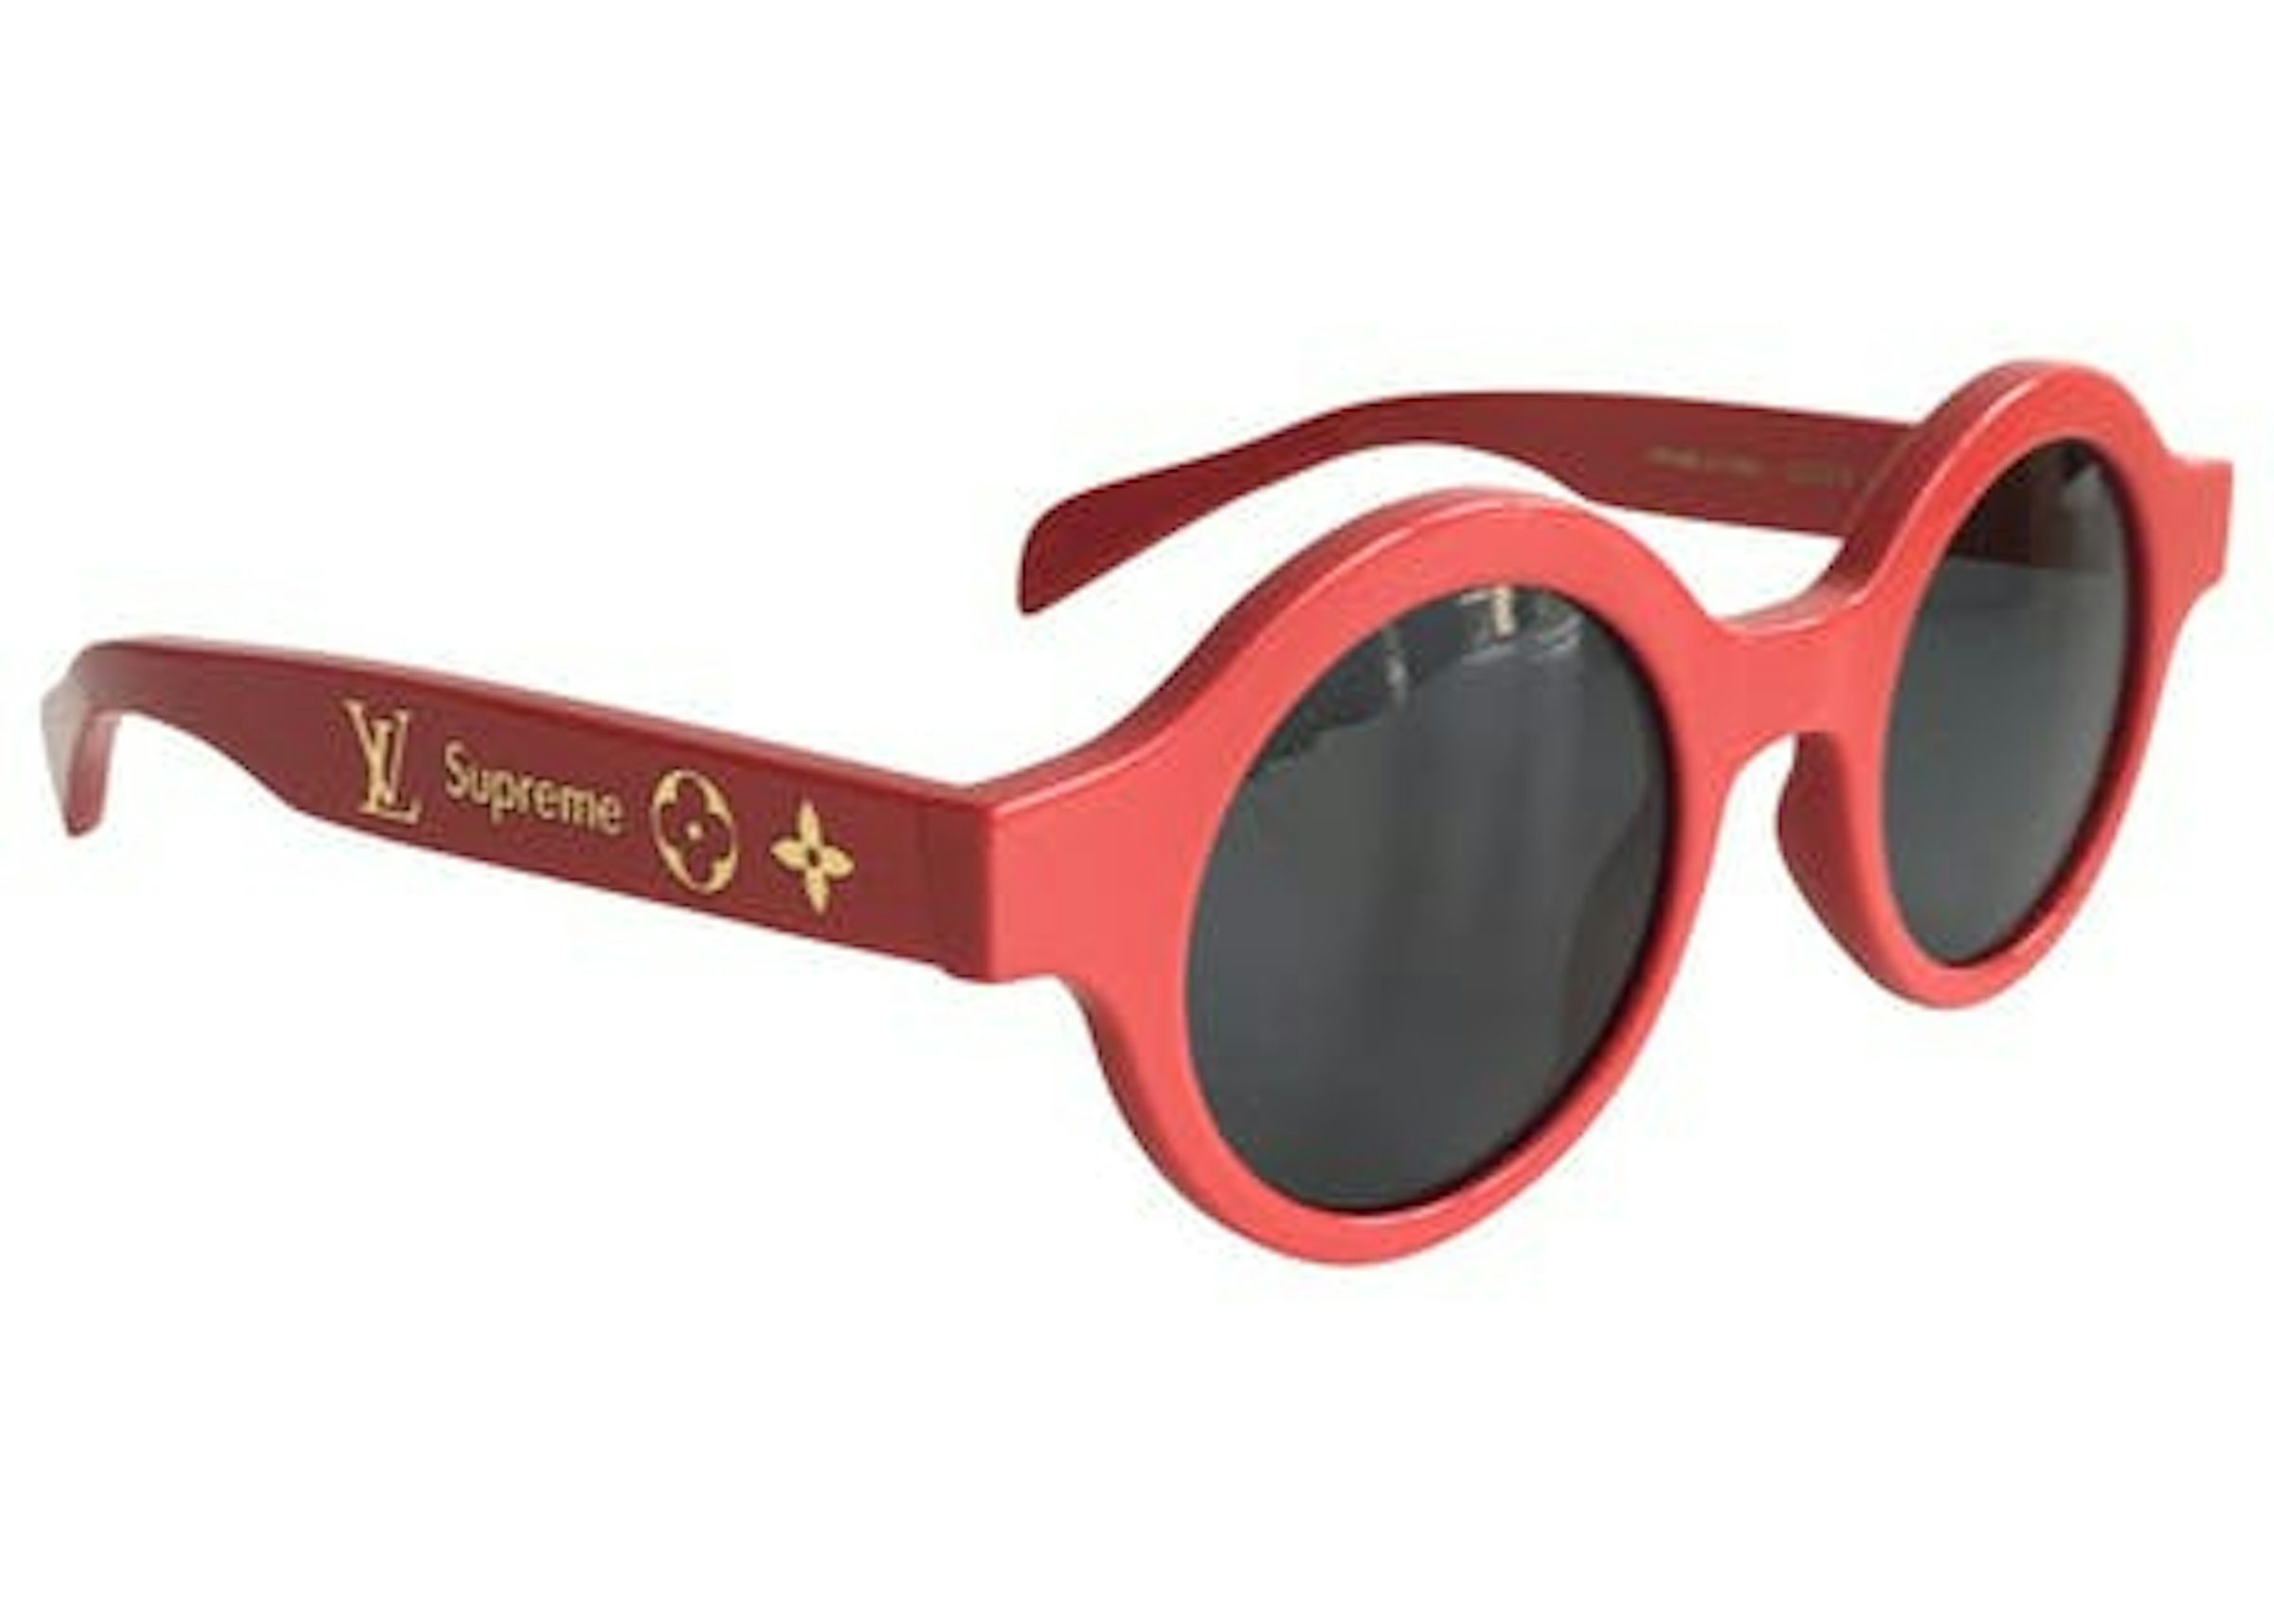 Louis Vuitton X Supreme Downtown Sunglasses Available For Immediate Sale At  Sotheby's